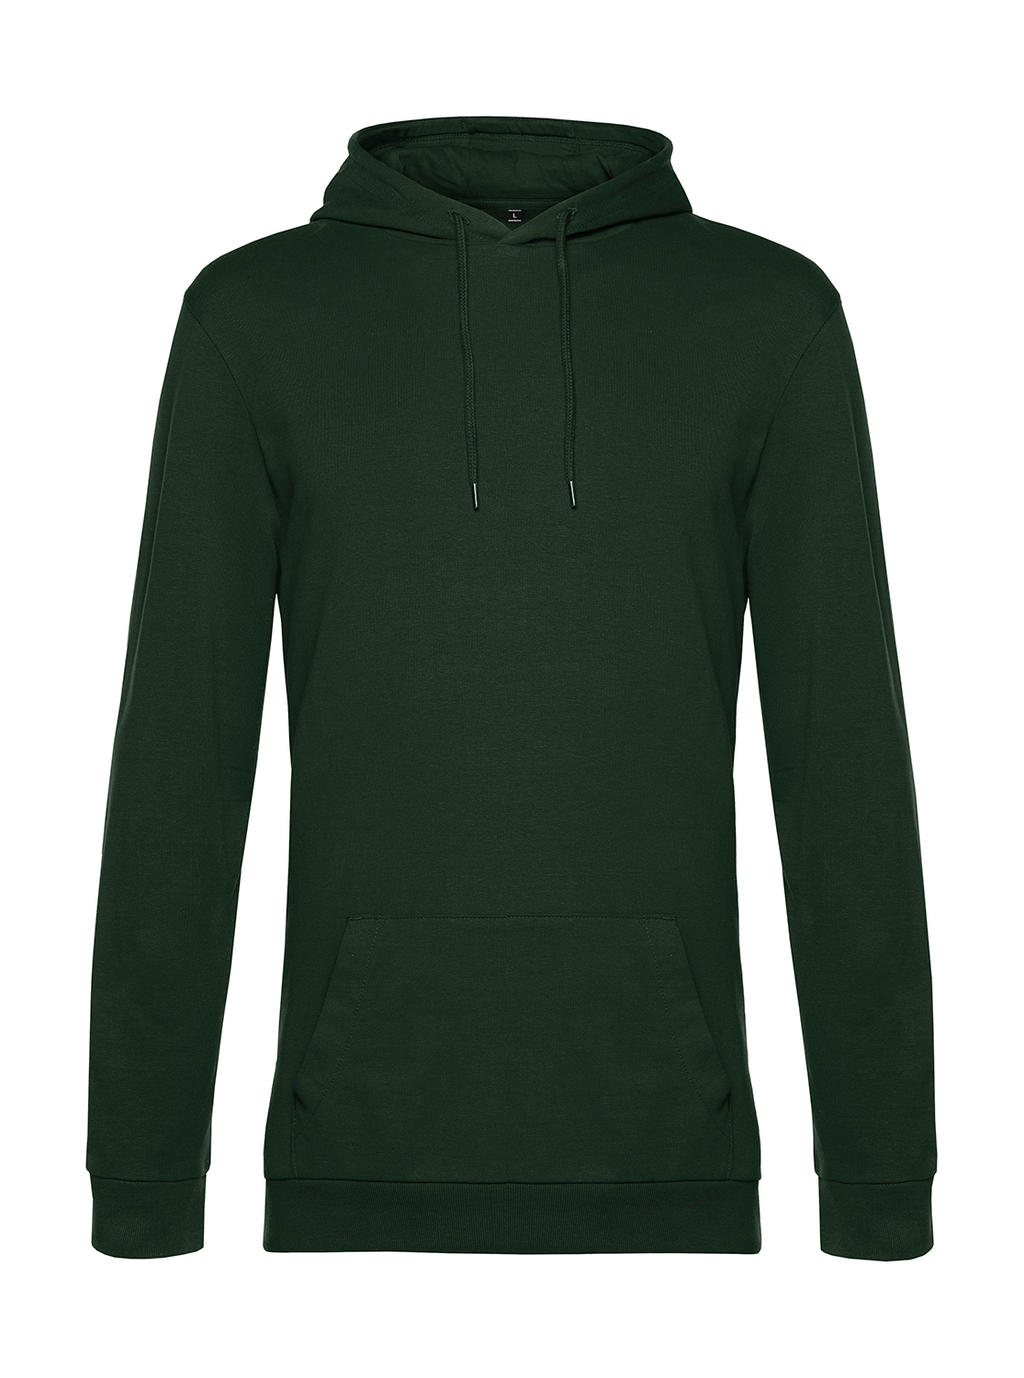  #Hoodie French Terry in Farbe Forest Green